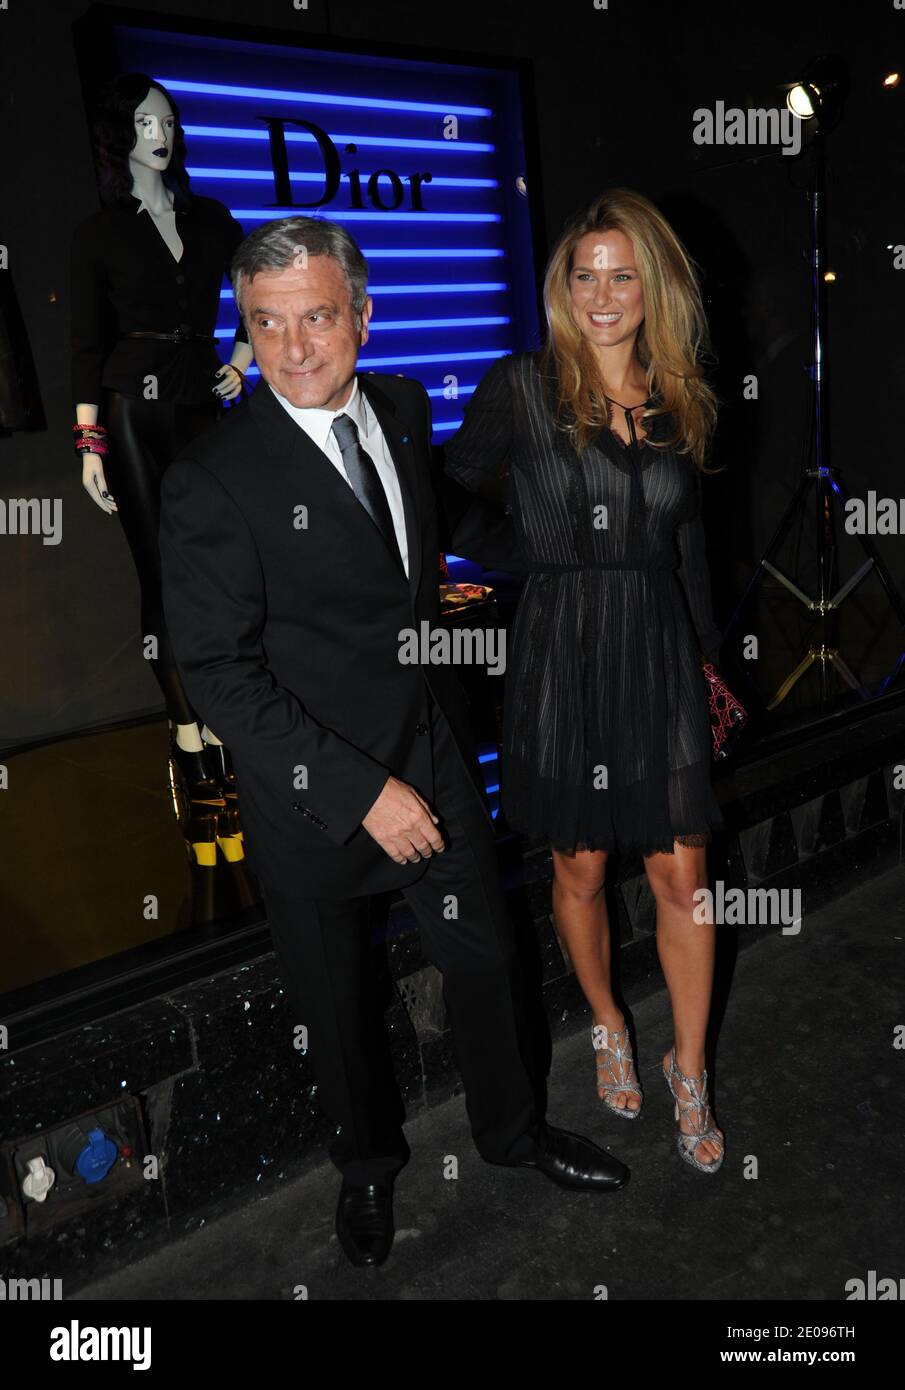 The CEO of Christian Dior S.A. and president of Christian Dior Couture S.A,  Sidney Toledano, arrives for a reception of the German association of  luxury producers 'Meisterkreis' at the Adlon hotel in